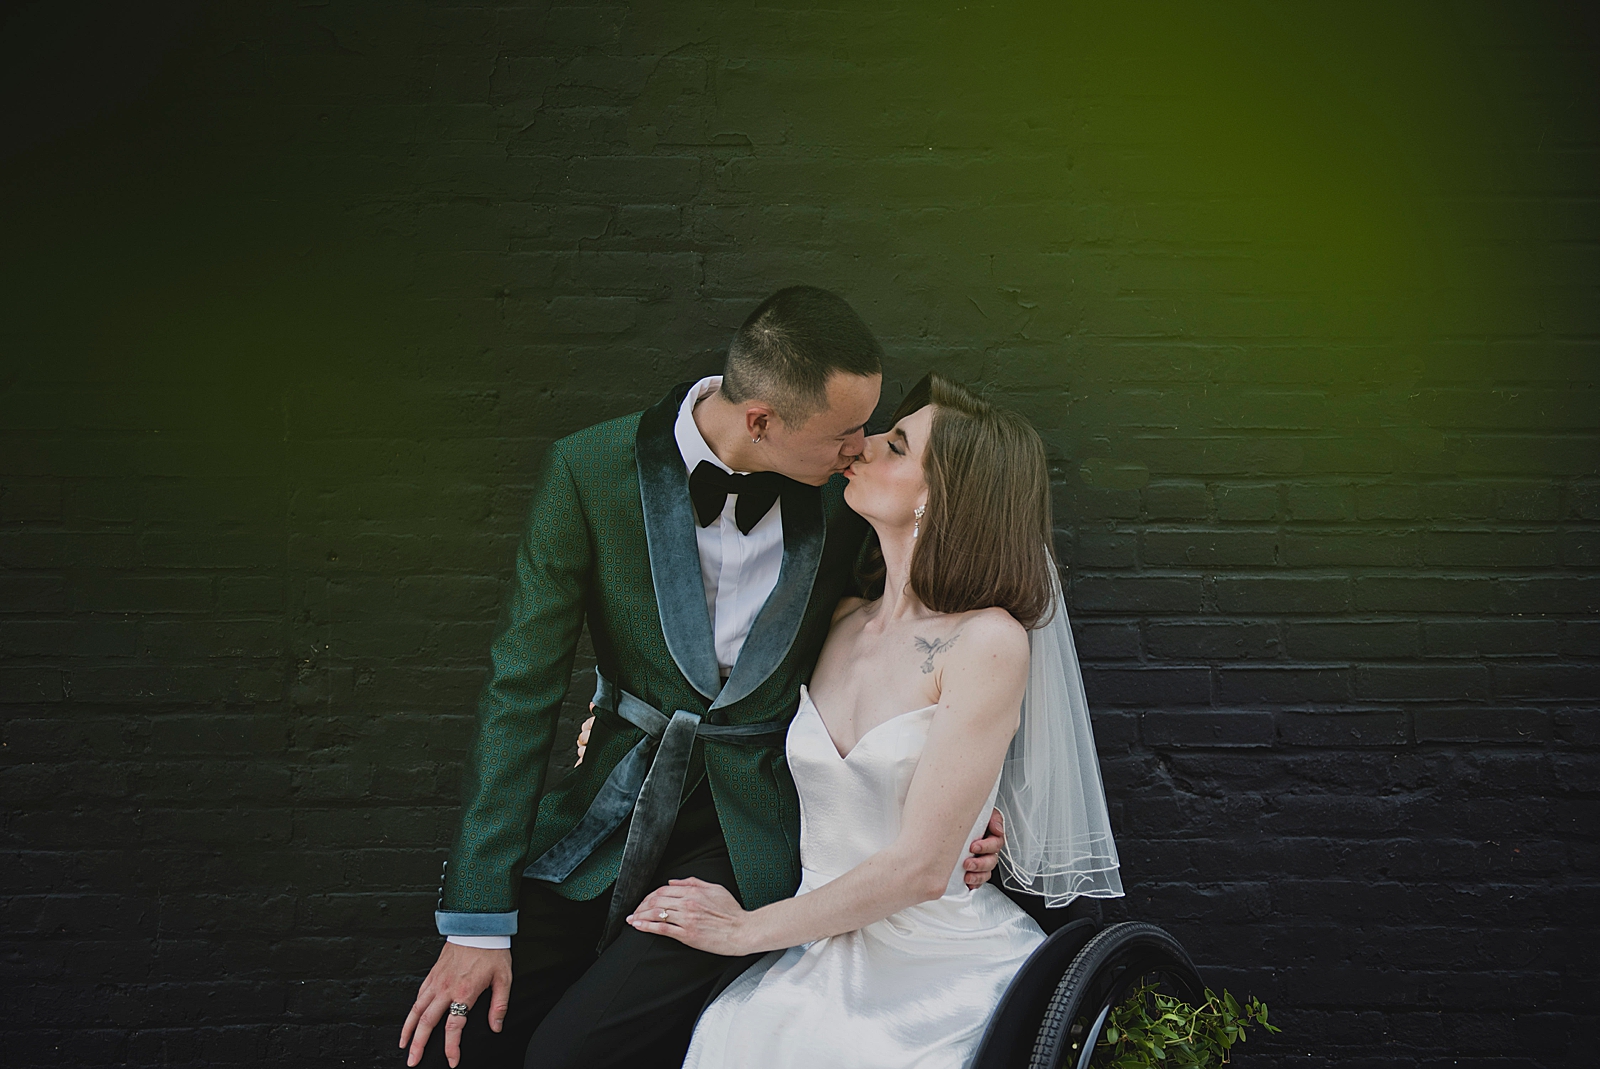 Upper body shot of the groom leaning on the bride's wheelchair as they share a kiss. 